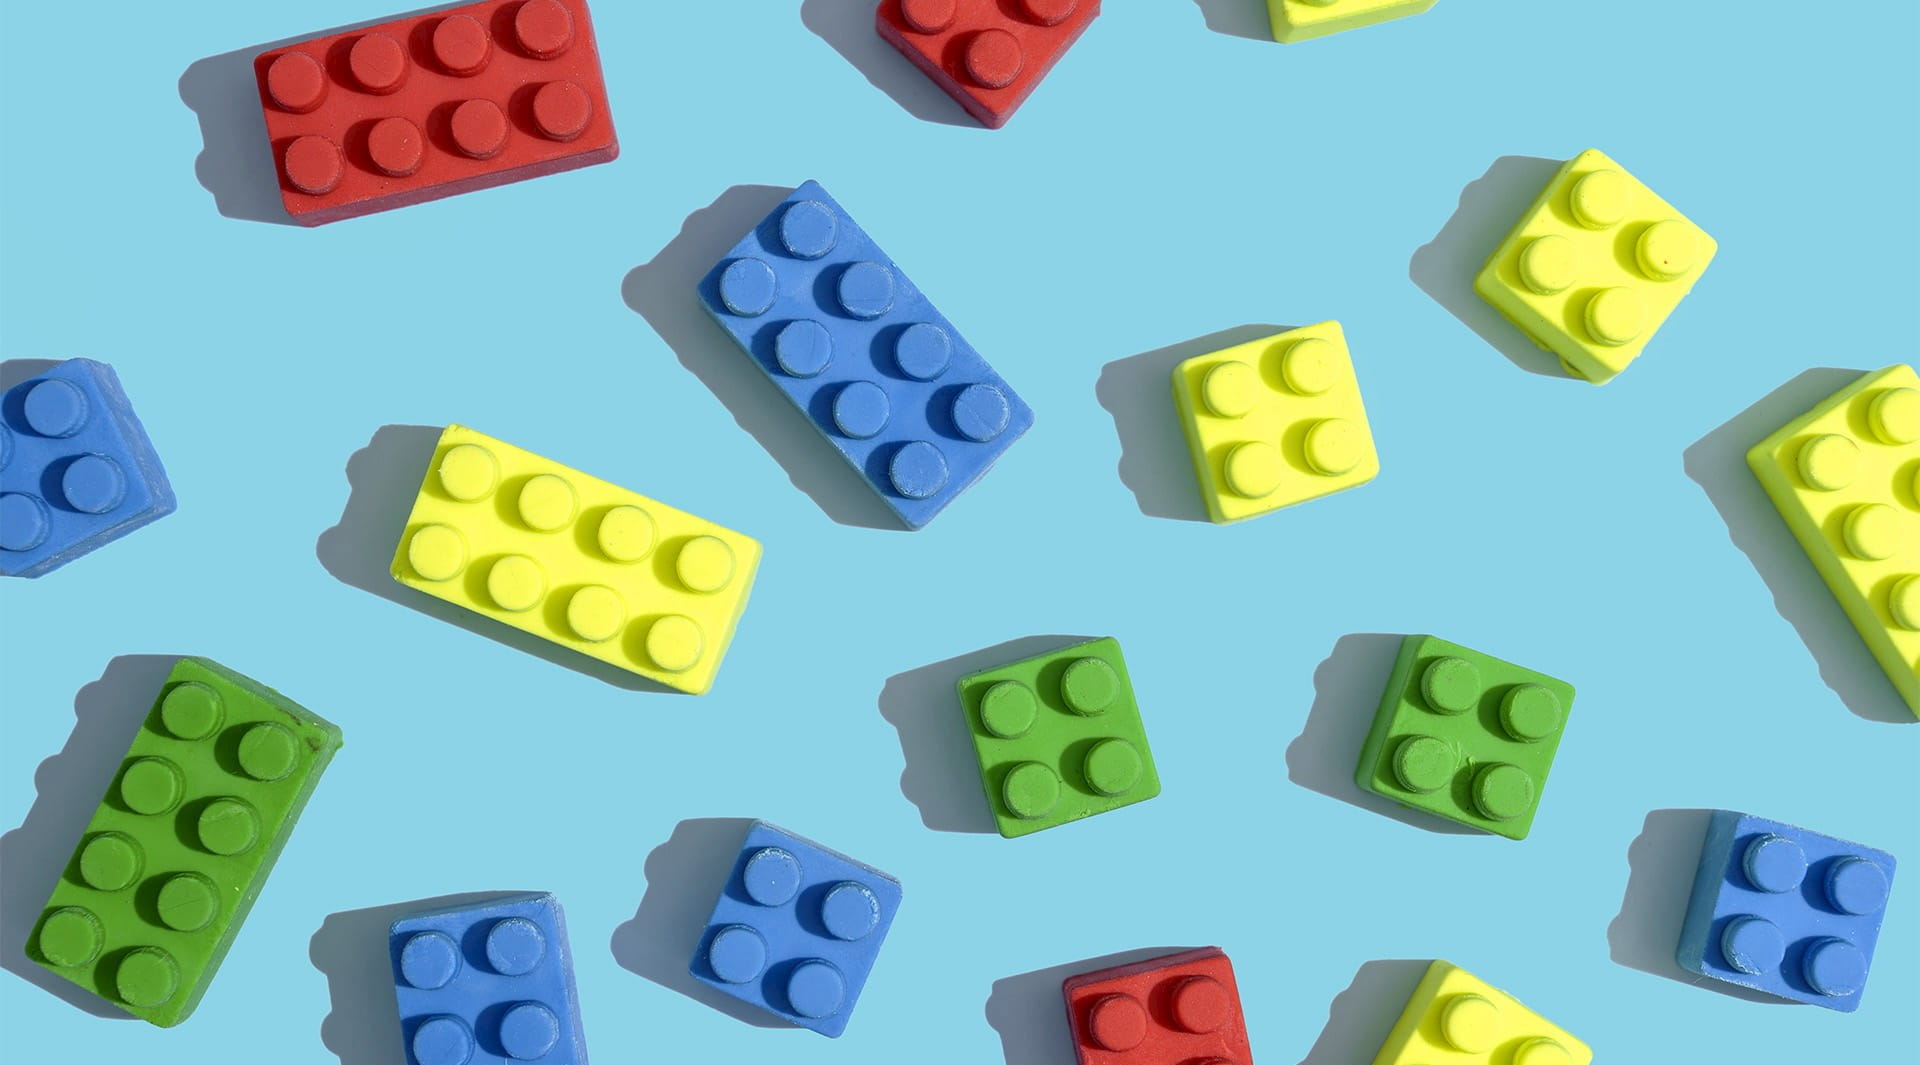 lego pieces building blocks red blue green yellow on a blue background